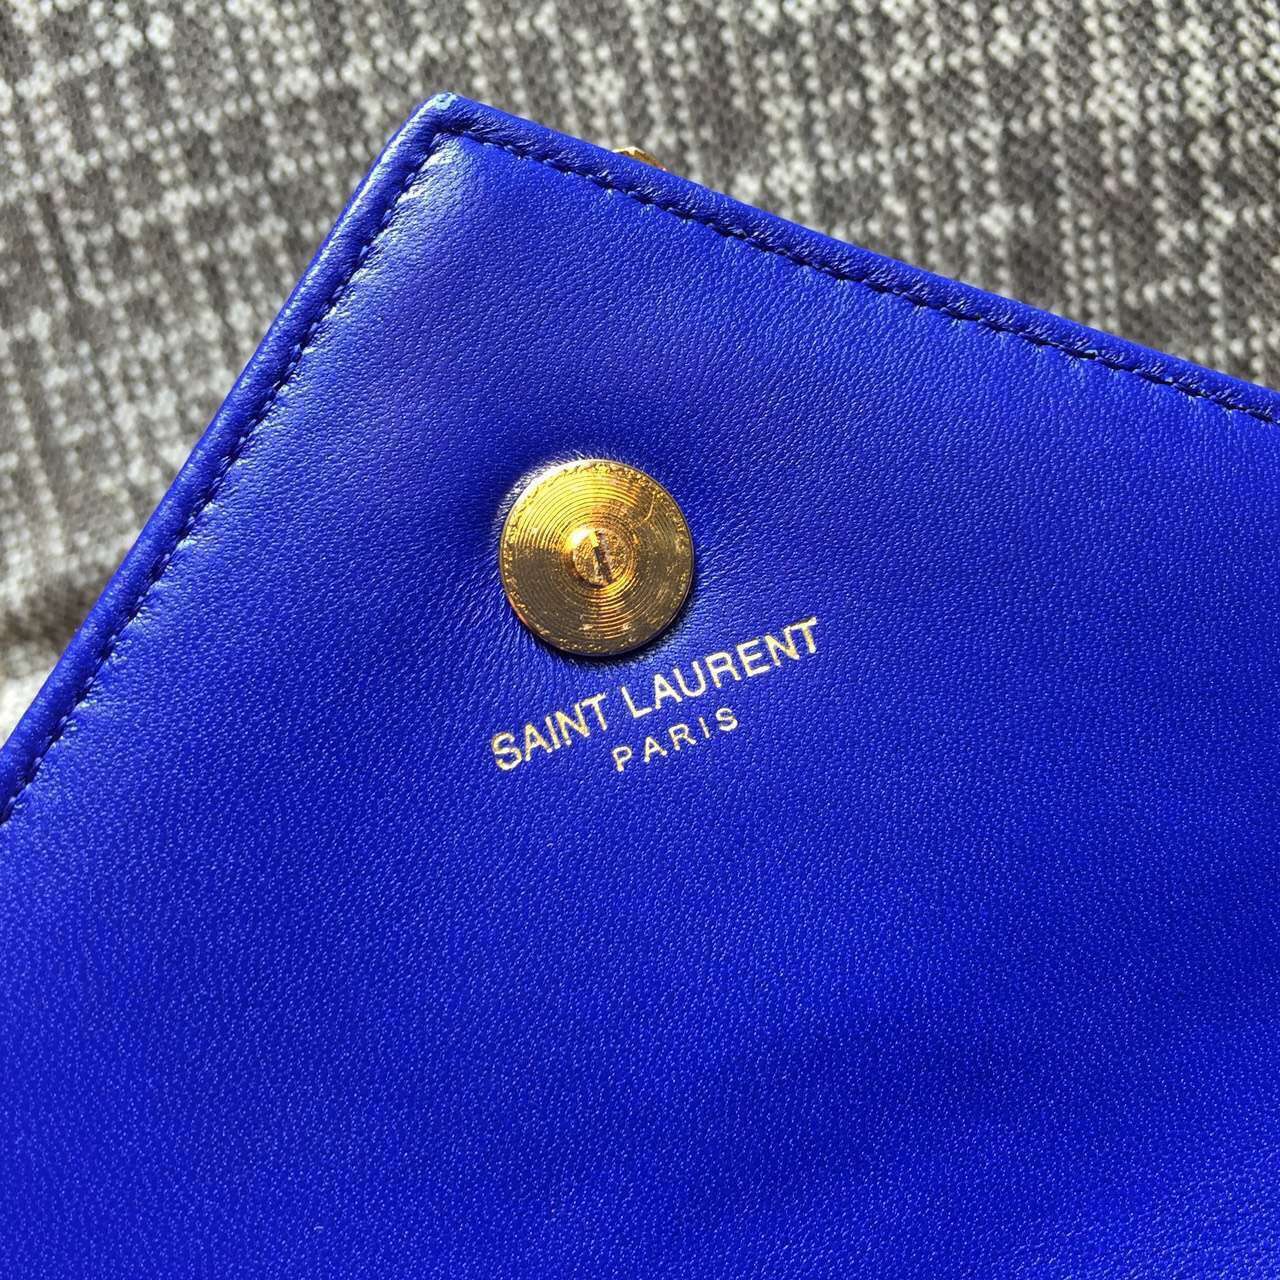 2015 Cheap YSL Outsale with Free Shipping-Saint Laurent Classic Baby Monogram Satchel in Electric Blue Matelasse Leather with Gold Hardware - Click Image to Close